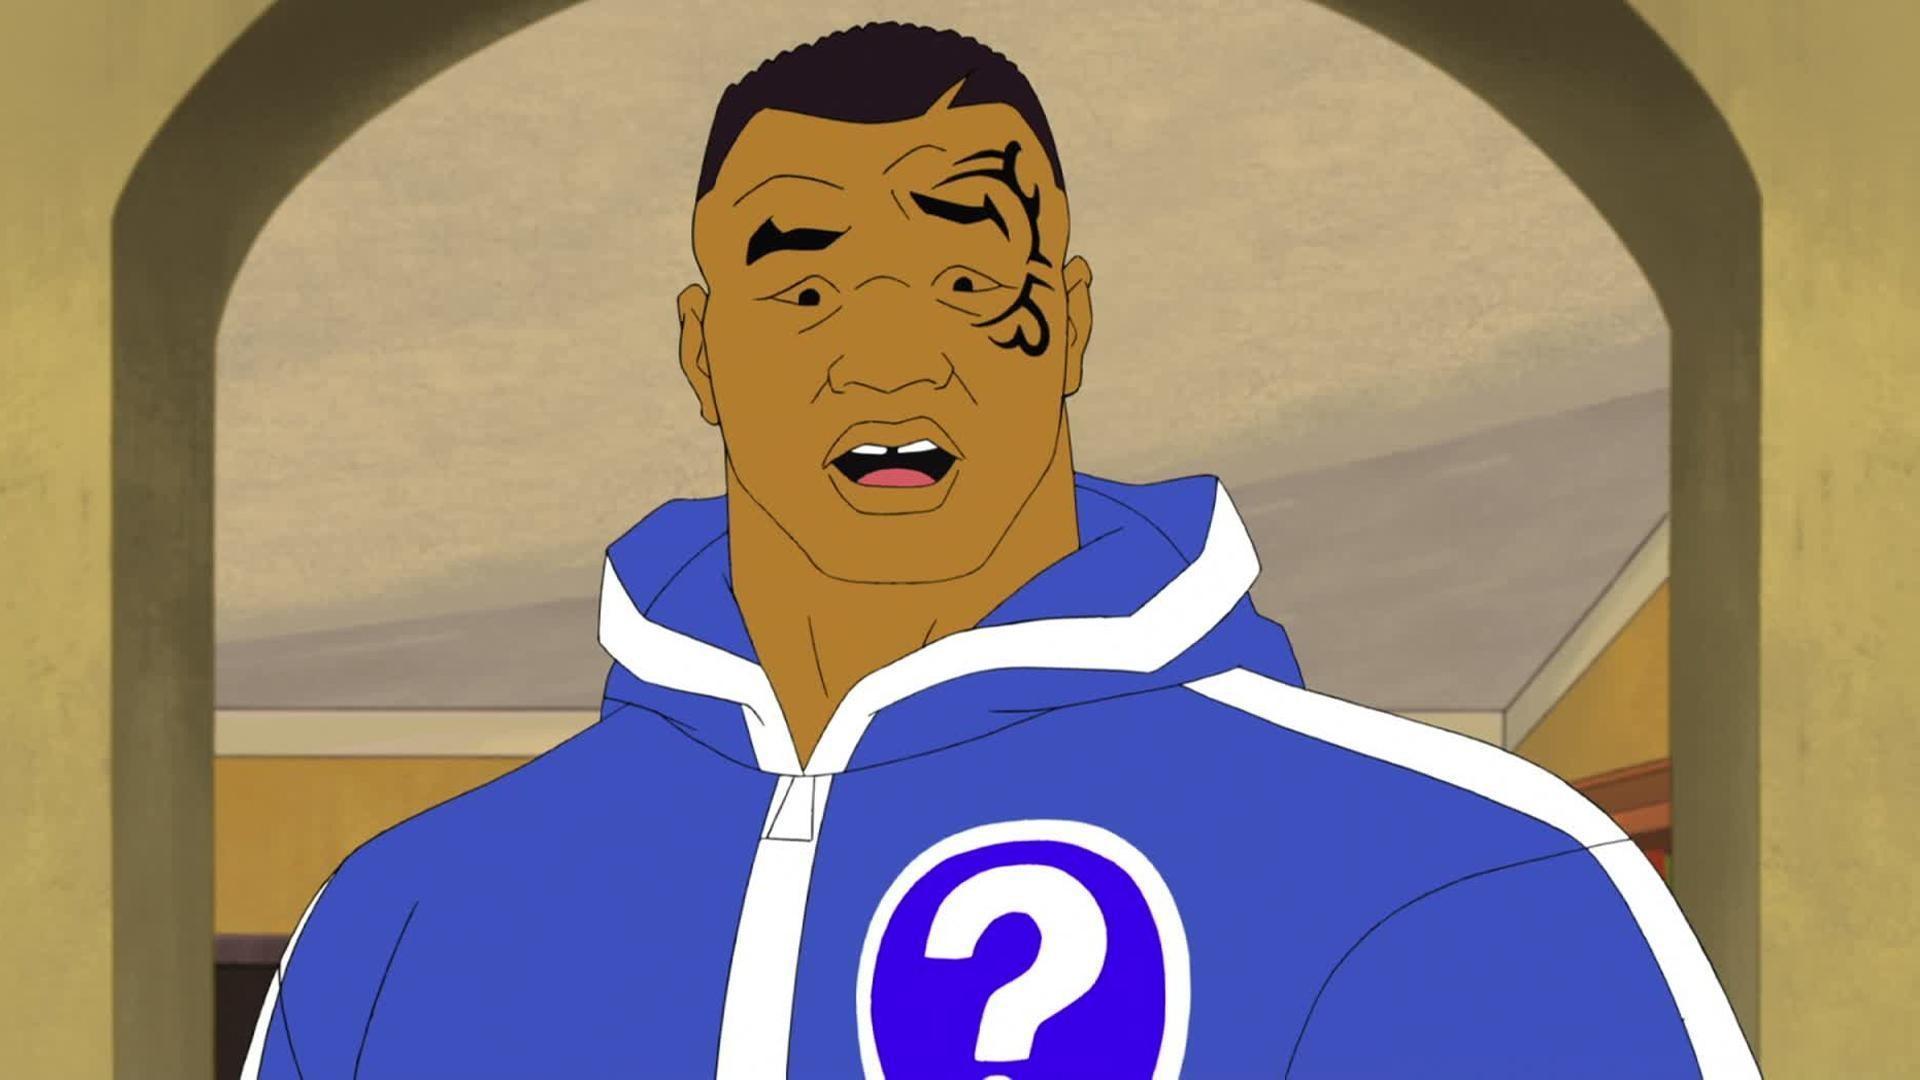 Mike Tyson Mysteries Best Wallpaper Hd For Pc